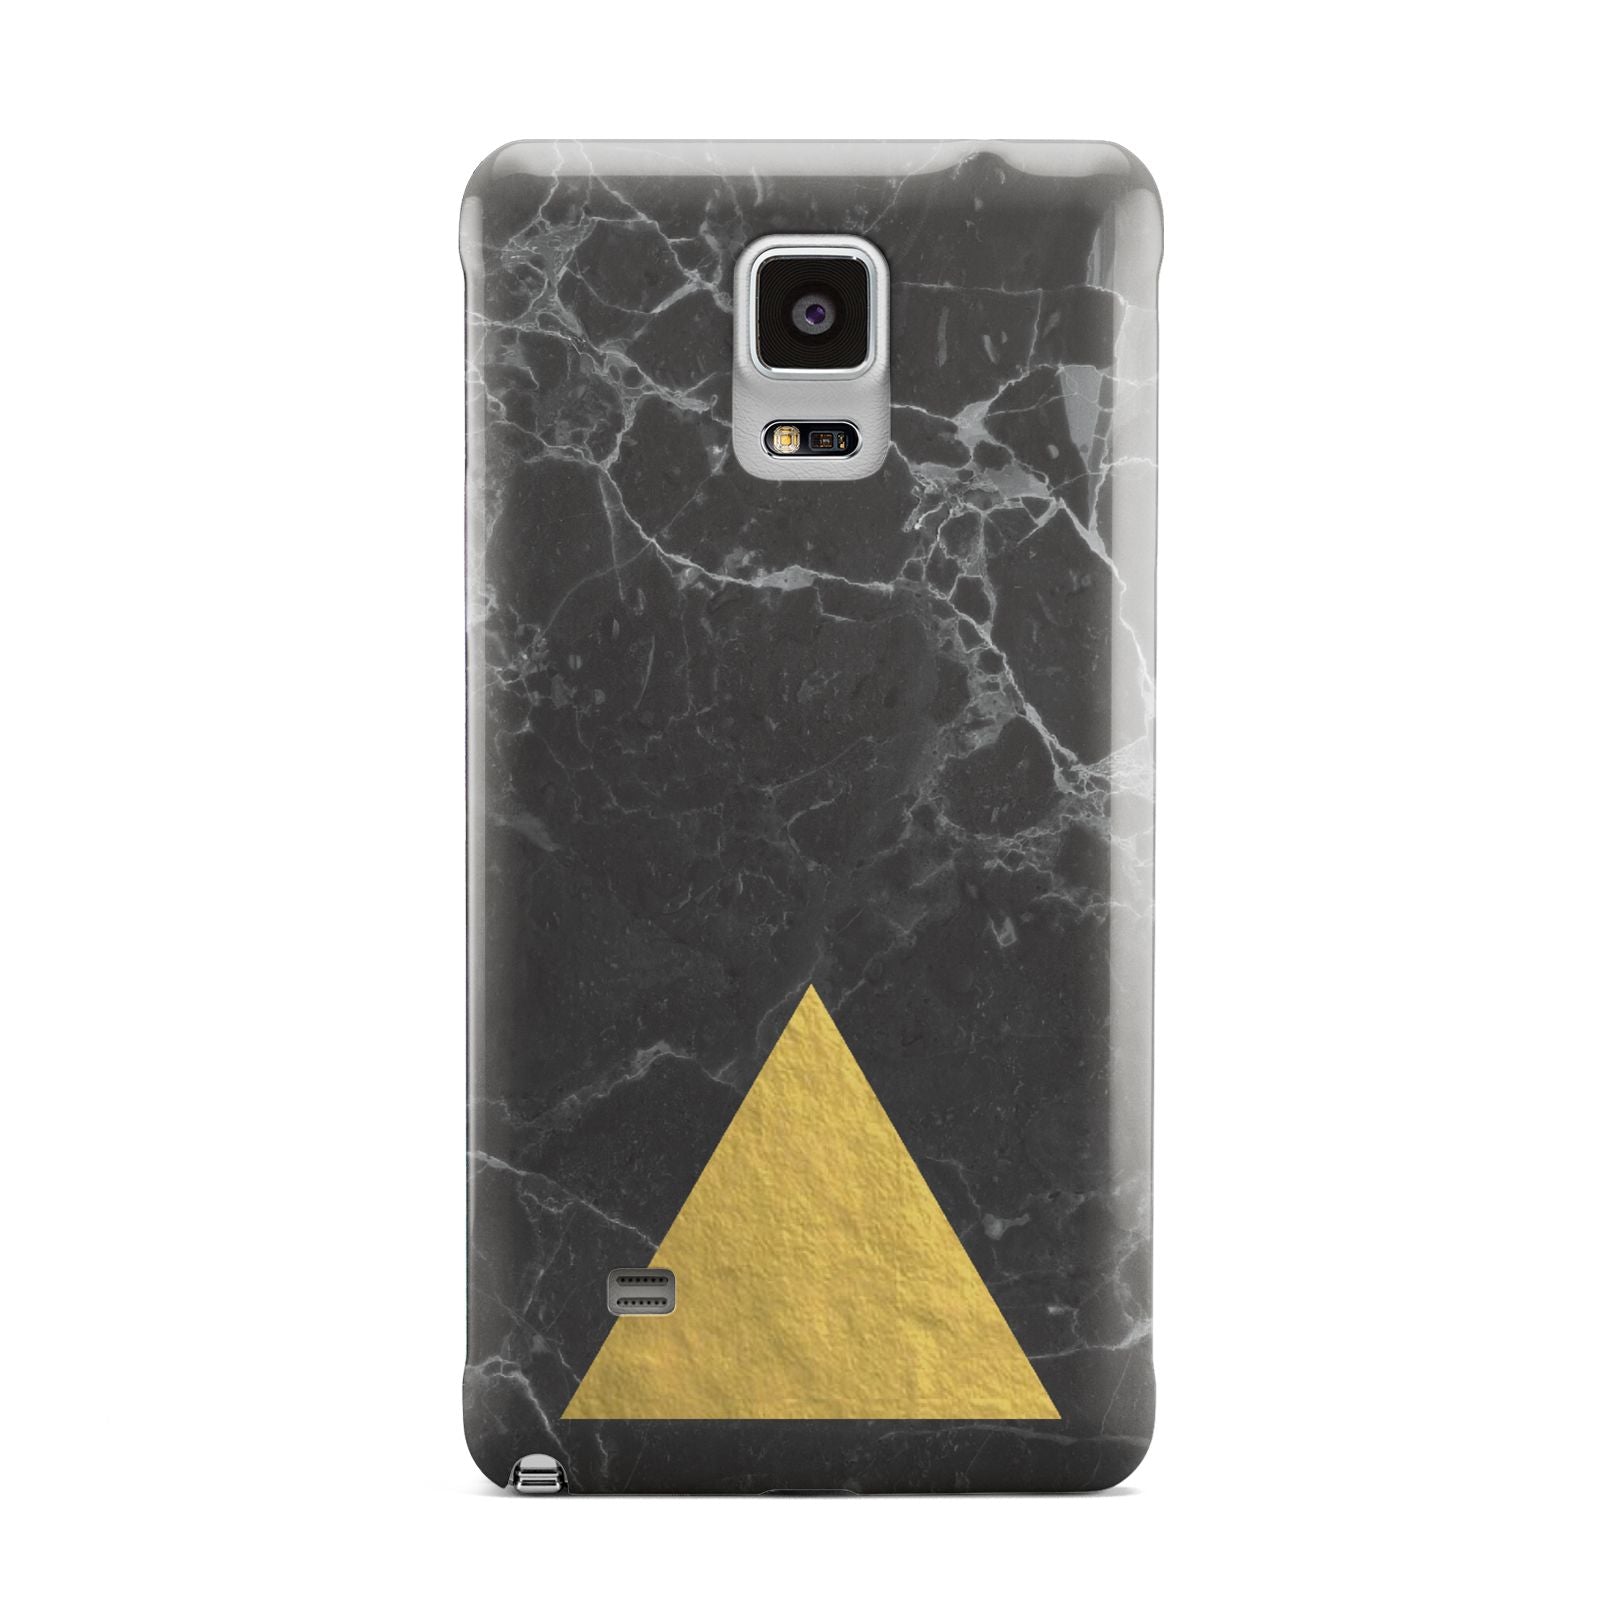 Marble Black Gold Foil Samsung Galaxy Note 4 Case